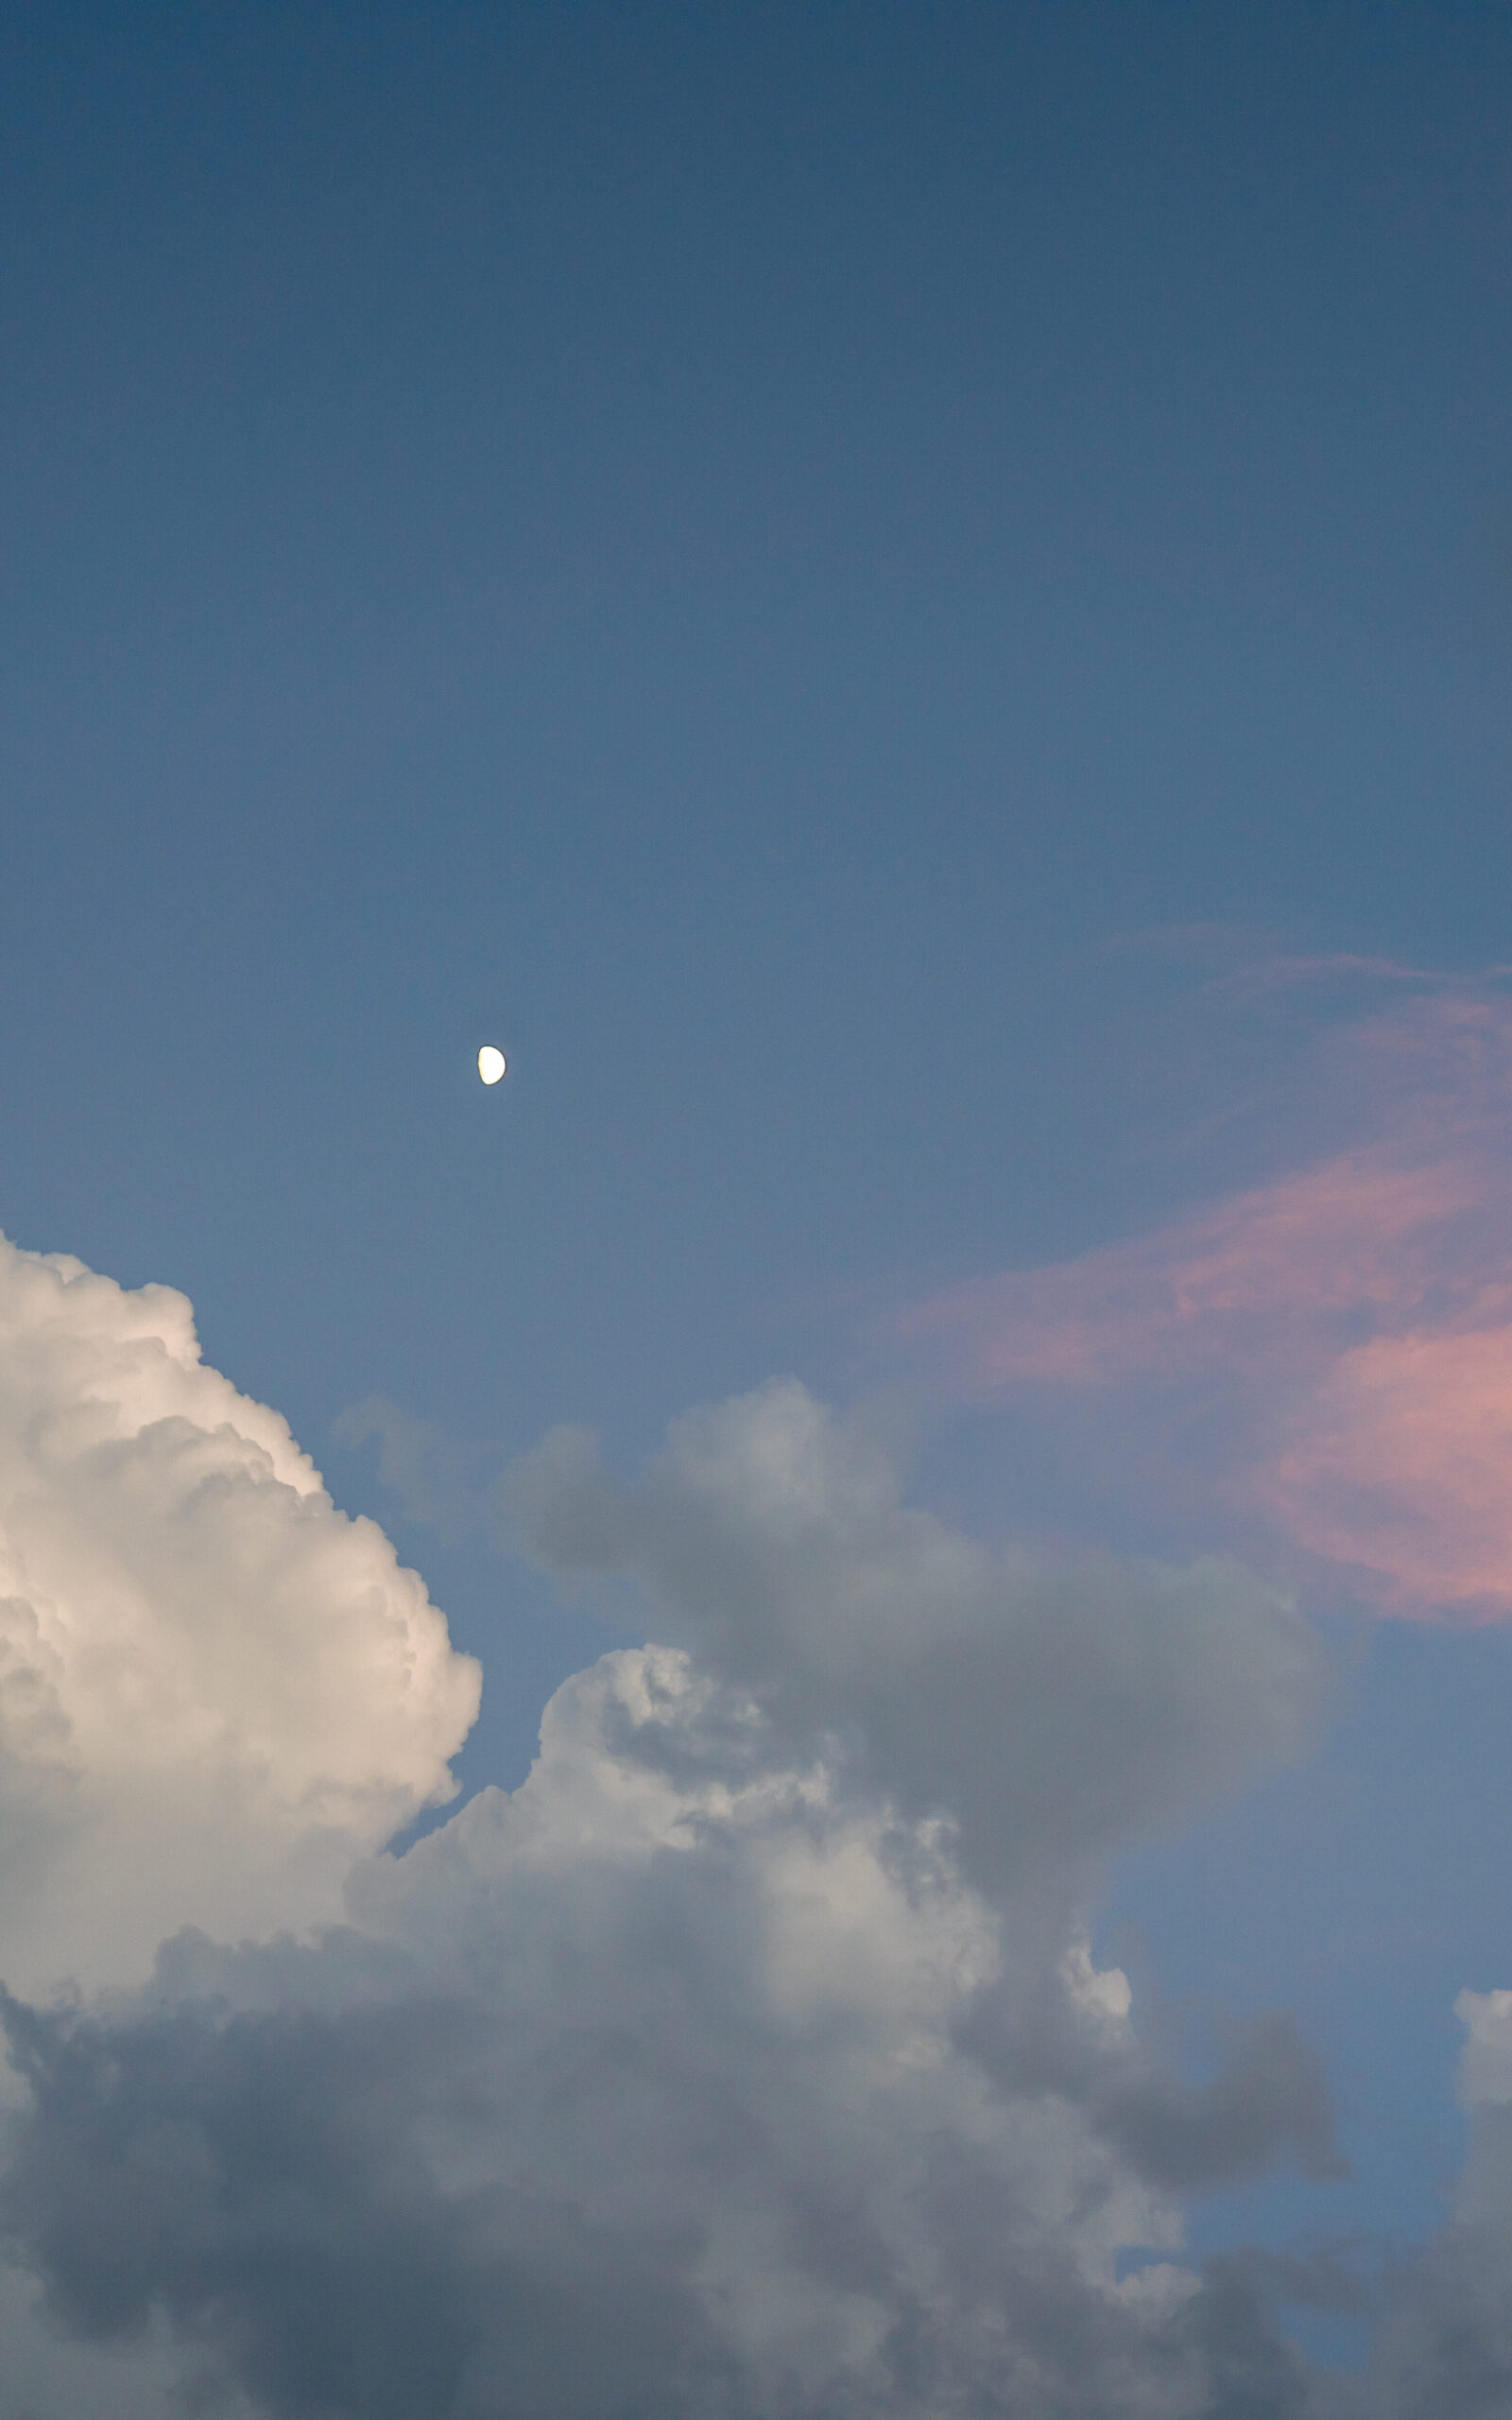 The moon shines brightly in the sky during dusk with white and pink clouds surrounding it.